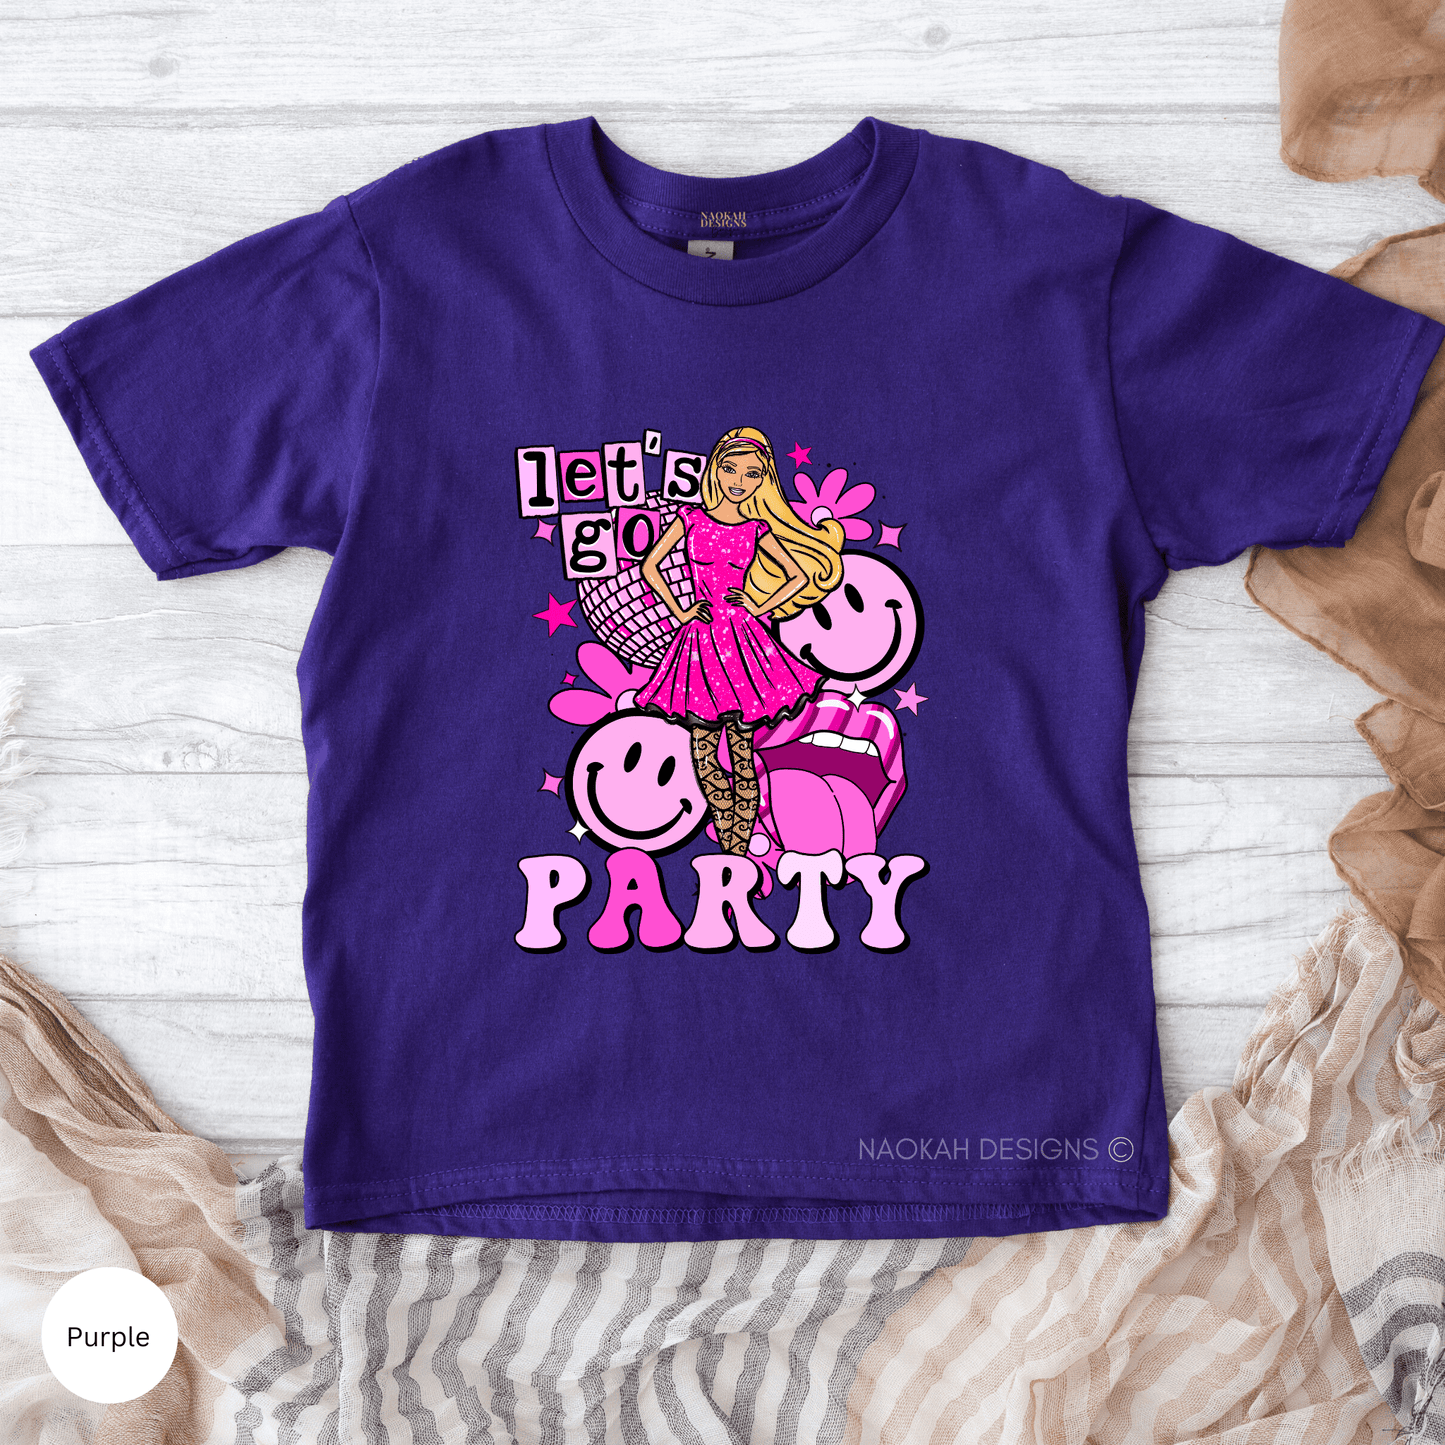 come on let's go party youth shirt, toddler shirt